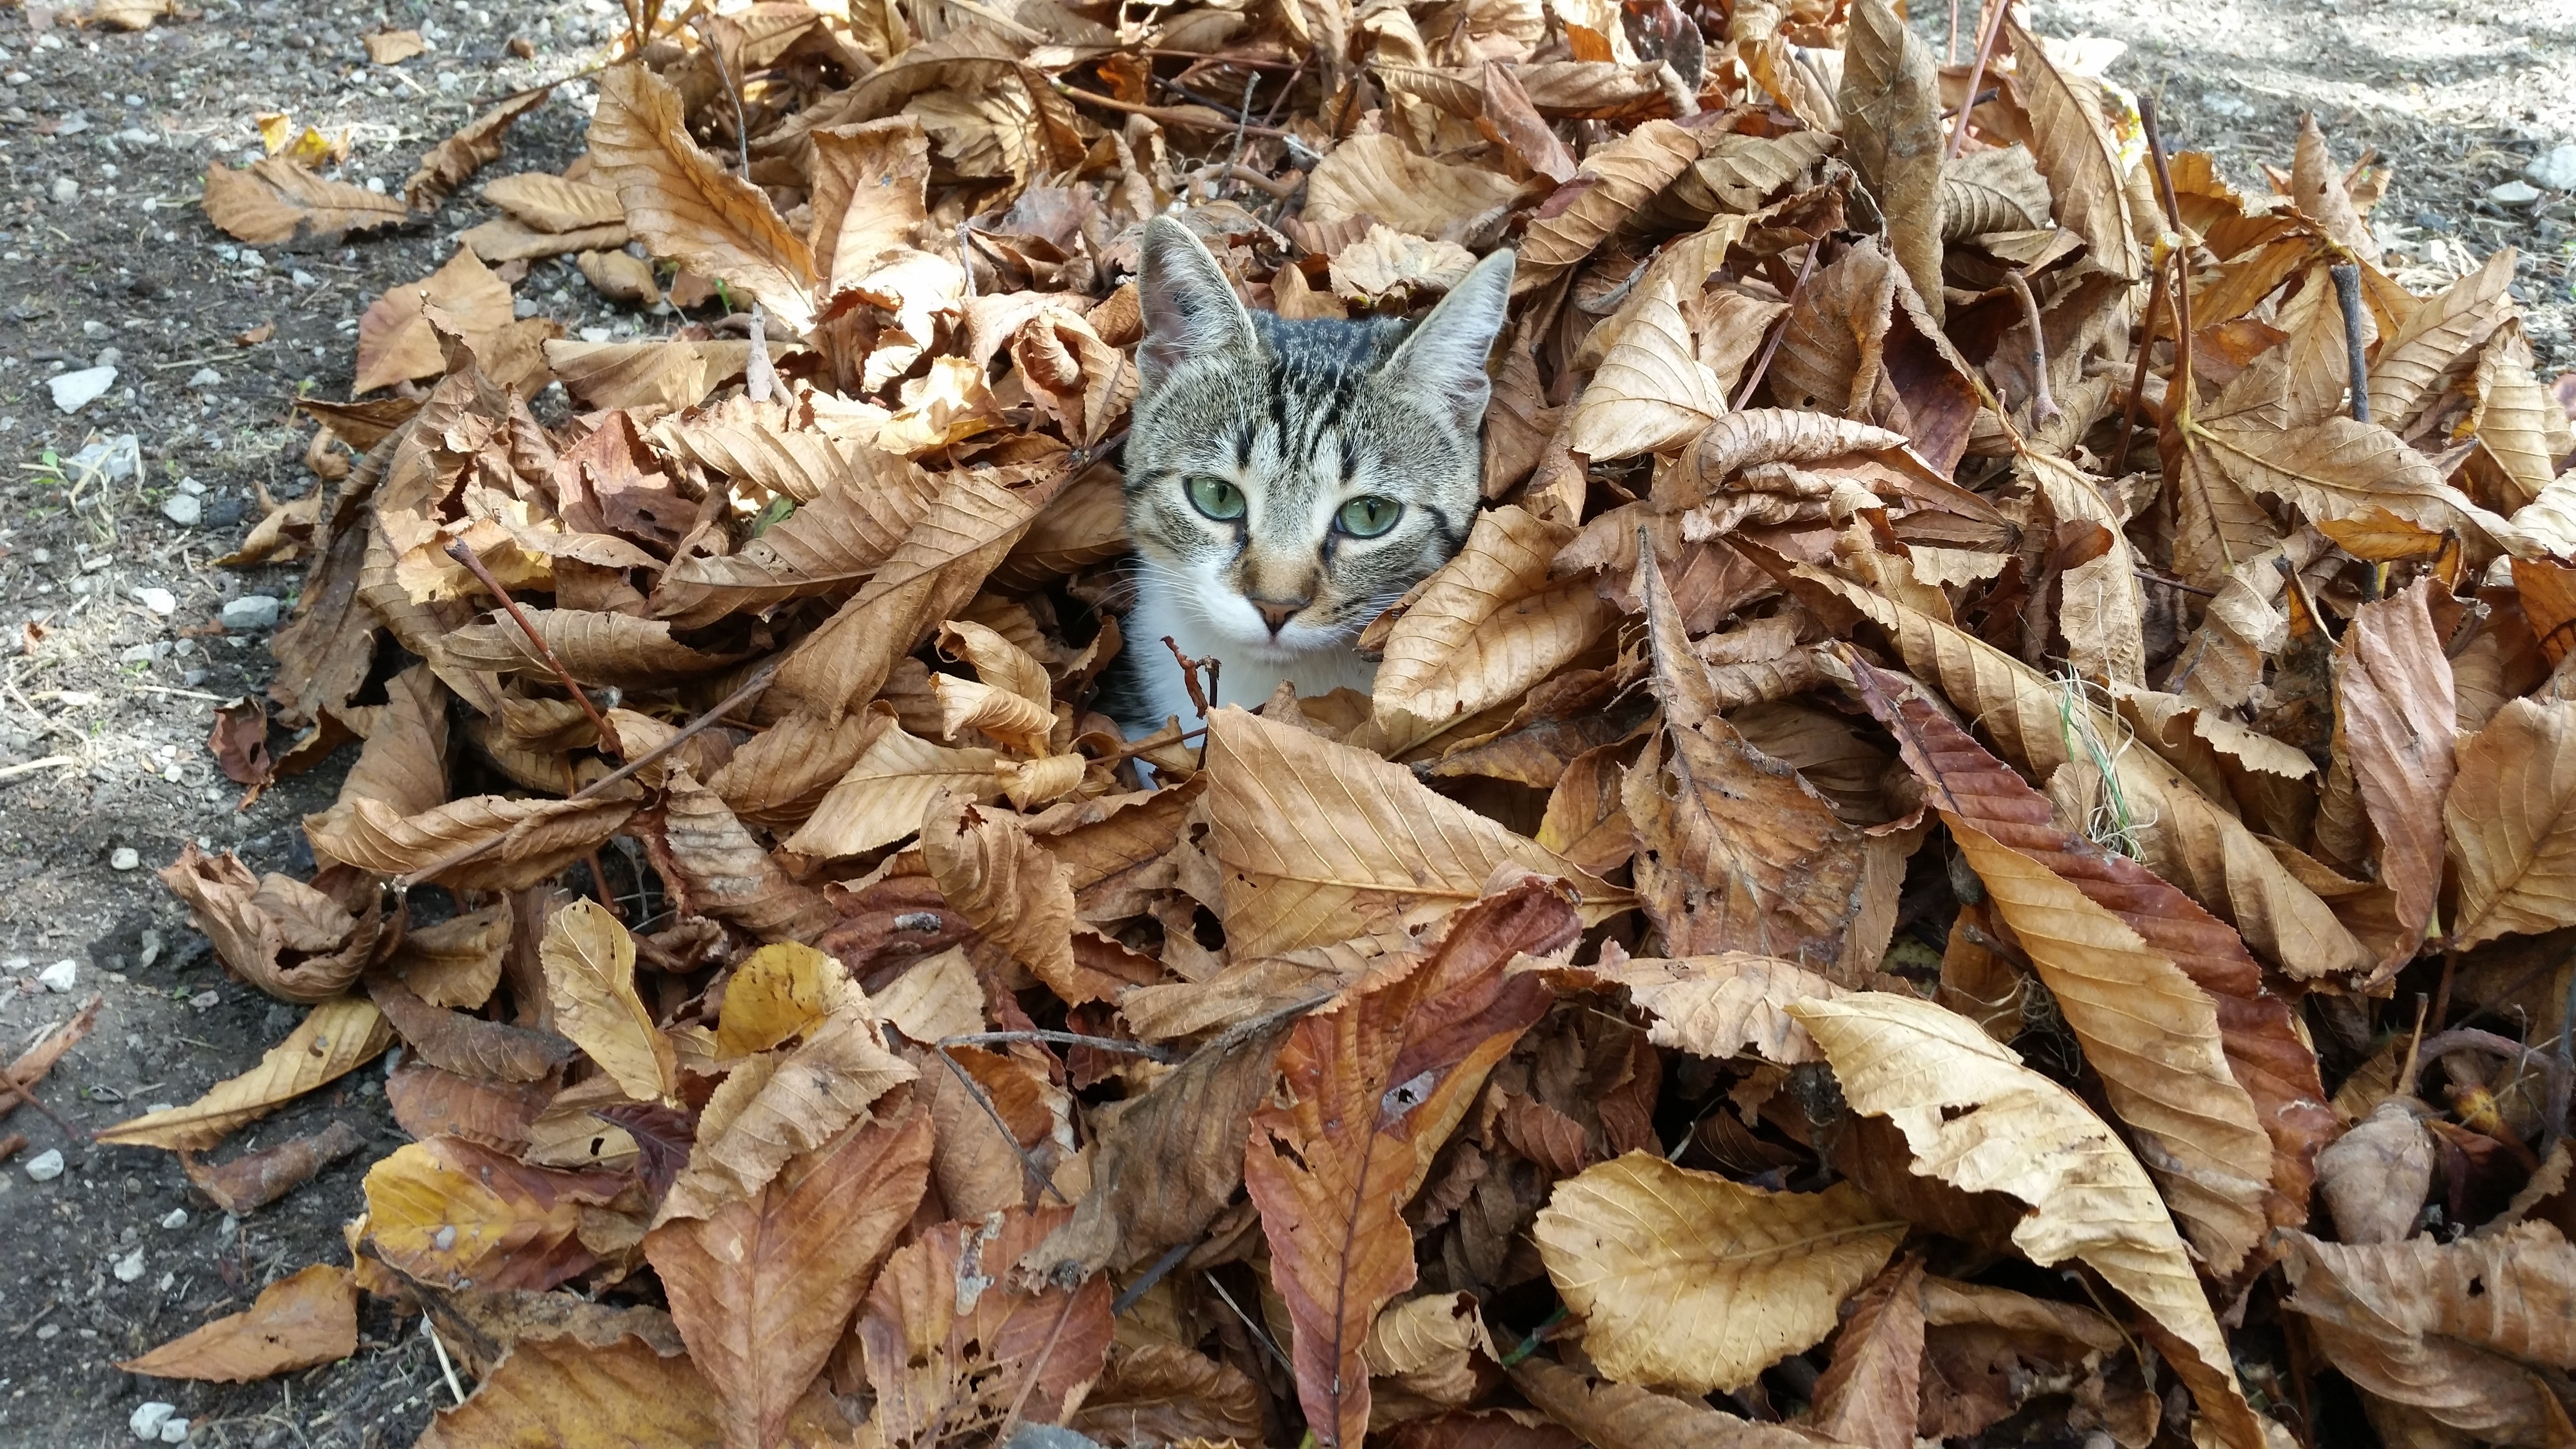 Cold, Leaves, Fall, Cat, Dry Leaves, animal themes, no people